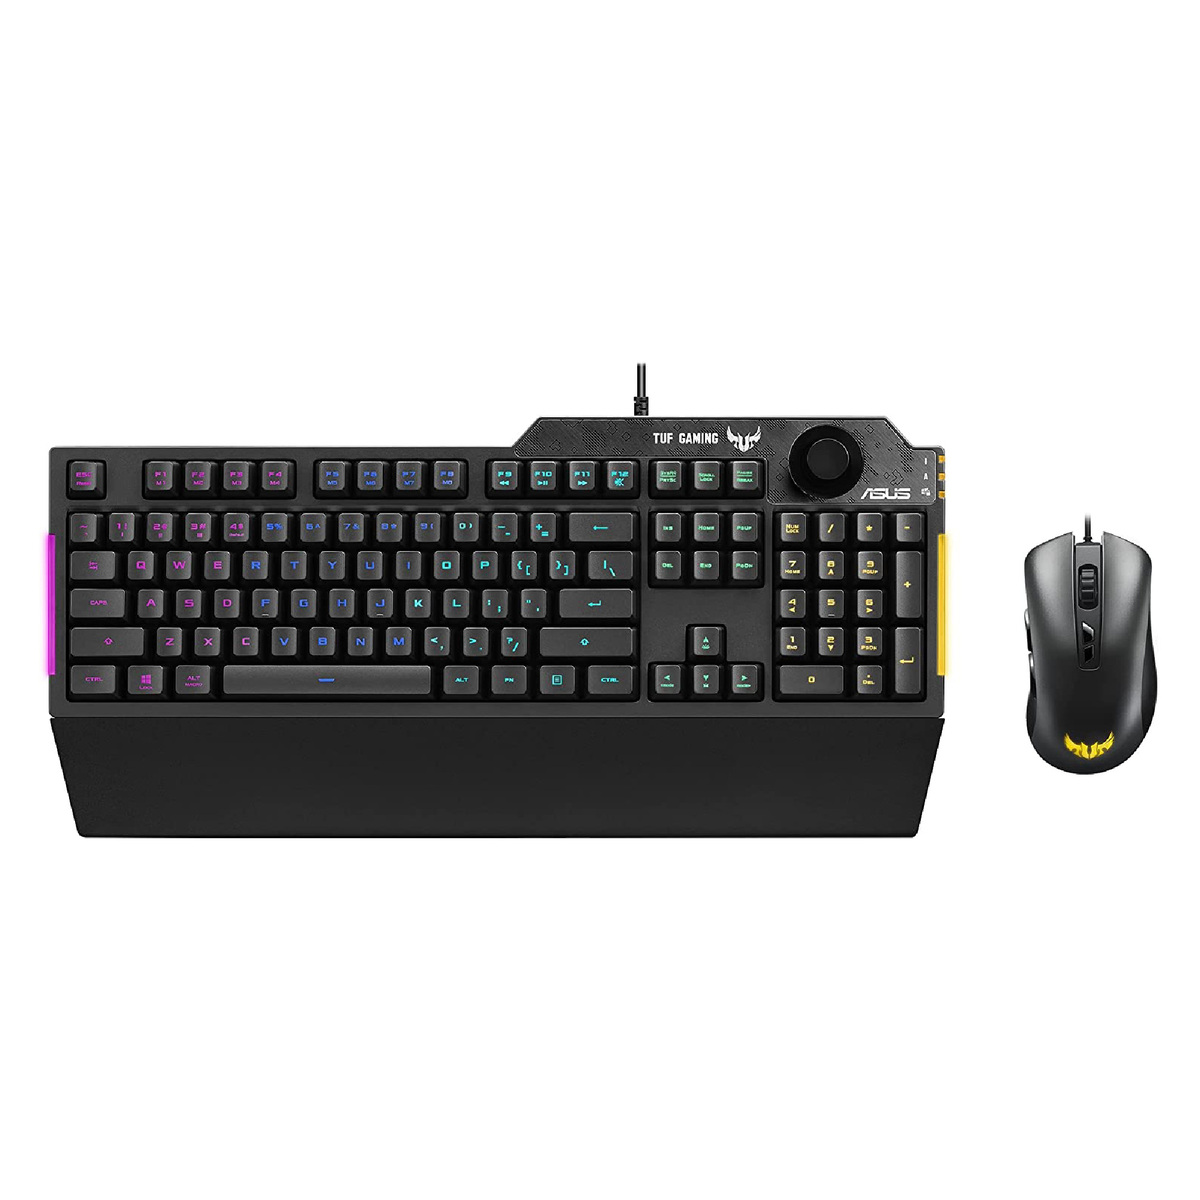 ASUS TUF Gaming Keyboard Mouse Combo K1 RGB Keyboard, M3 Lightweight Mouse, Aura Sync RGB Lighting, Comfortable & Rugged Design, Armoury Crate Software, Programmable Buttons for PC Gamers, Black